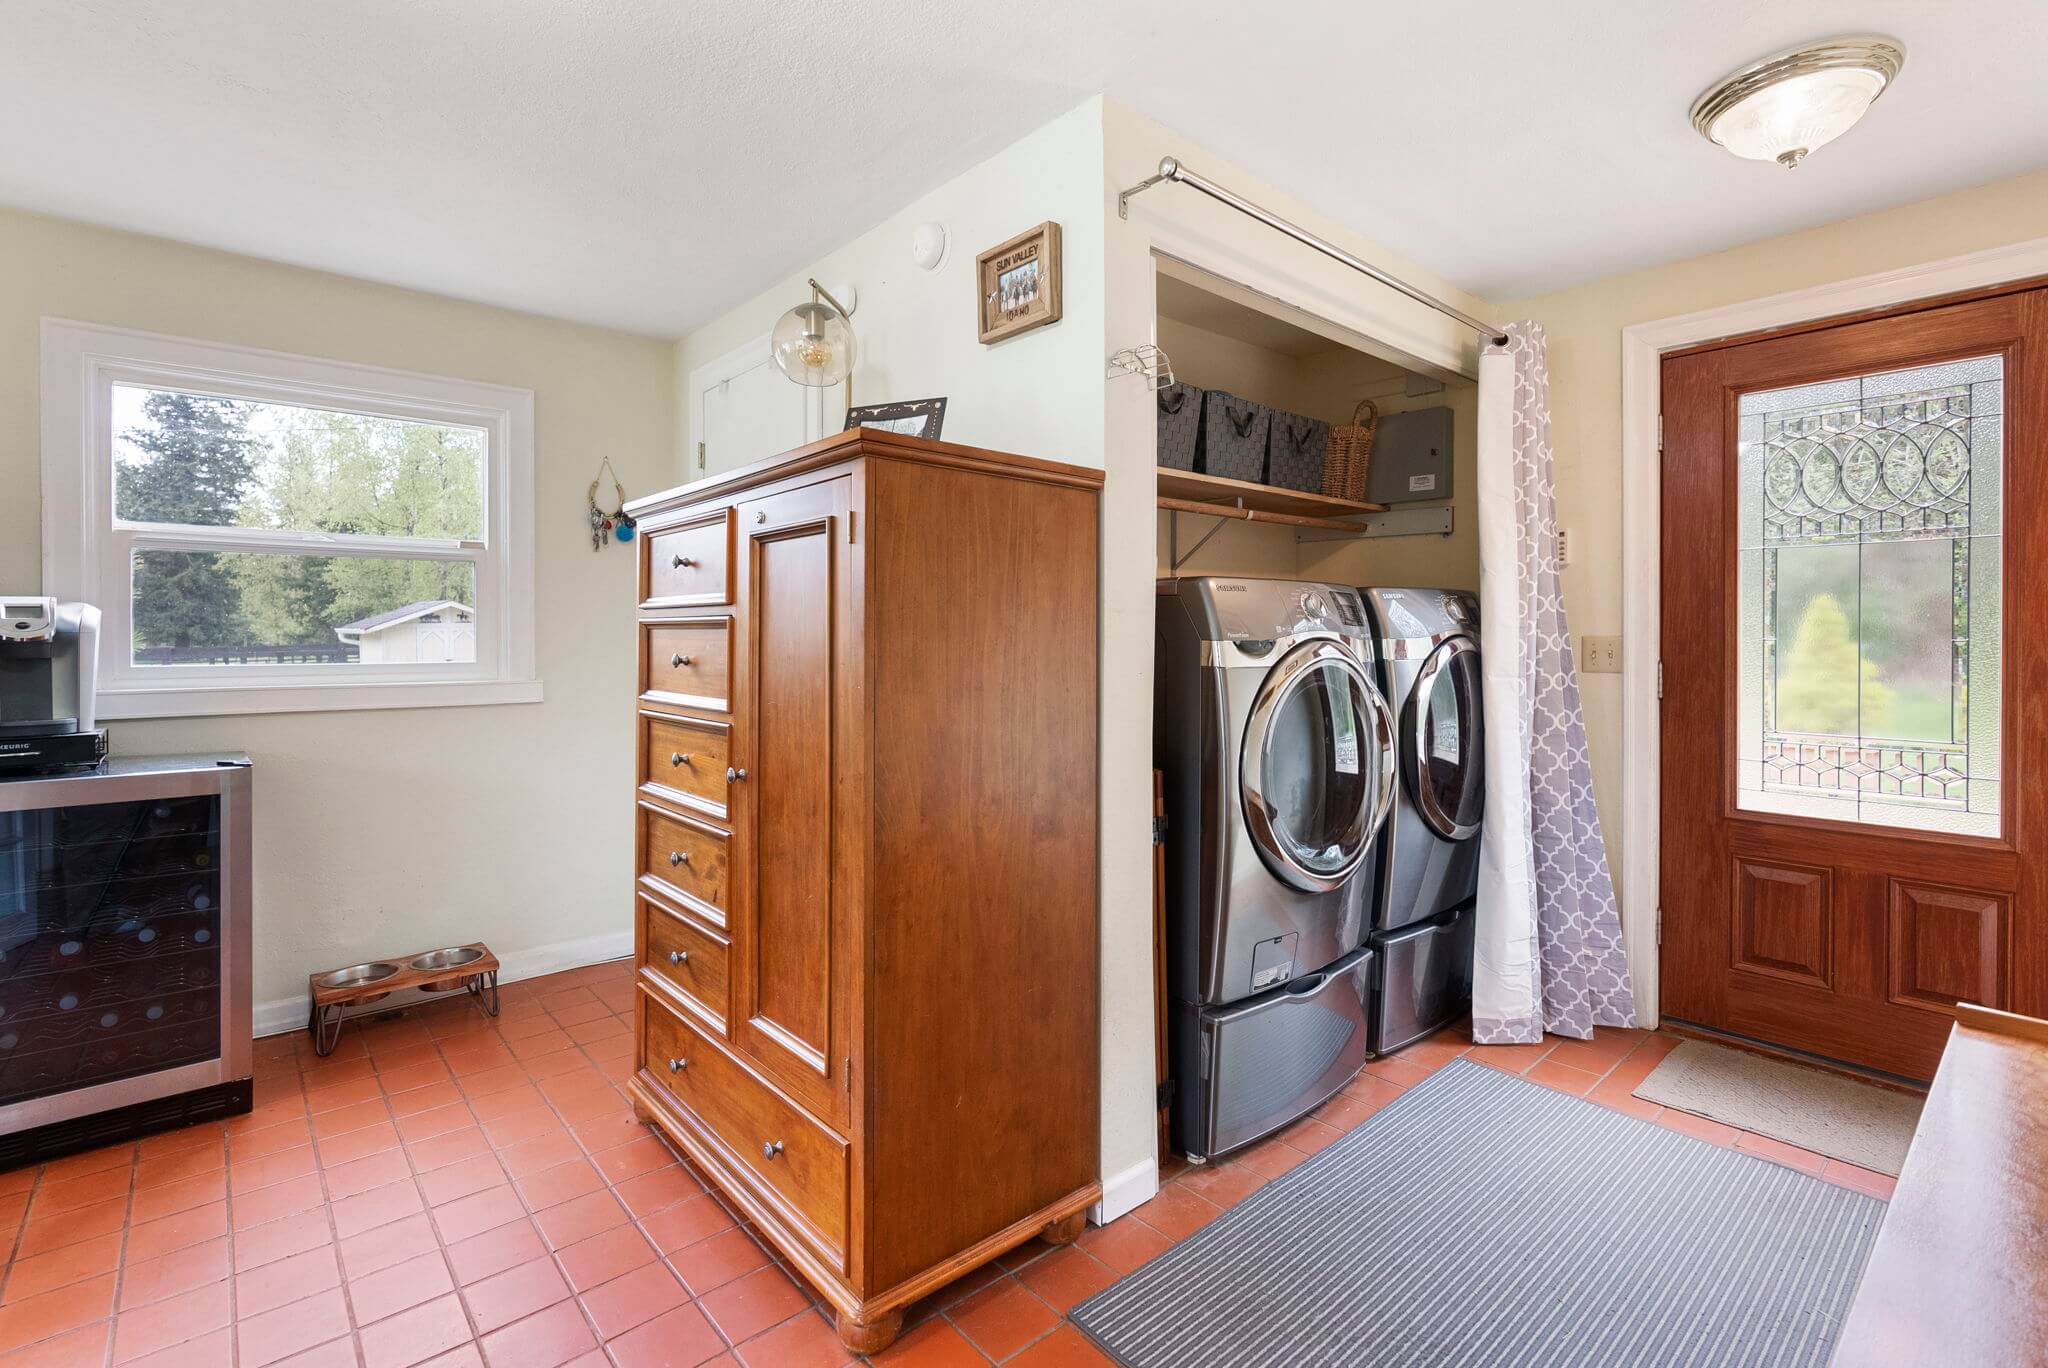 Home office includes a laundry area and door to back deck